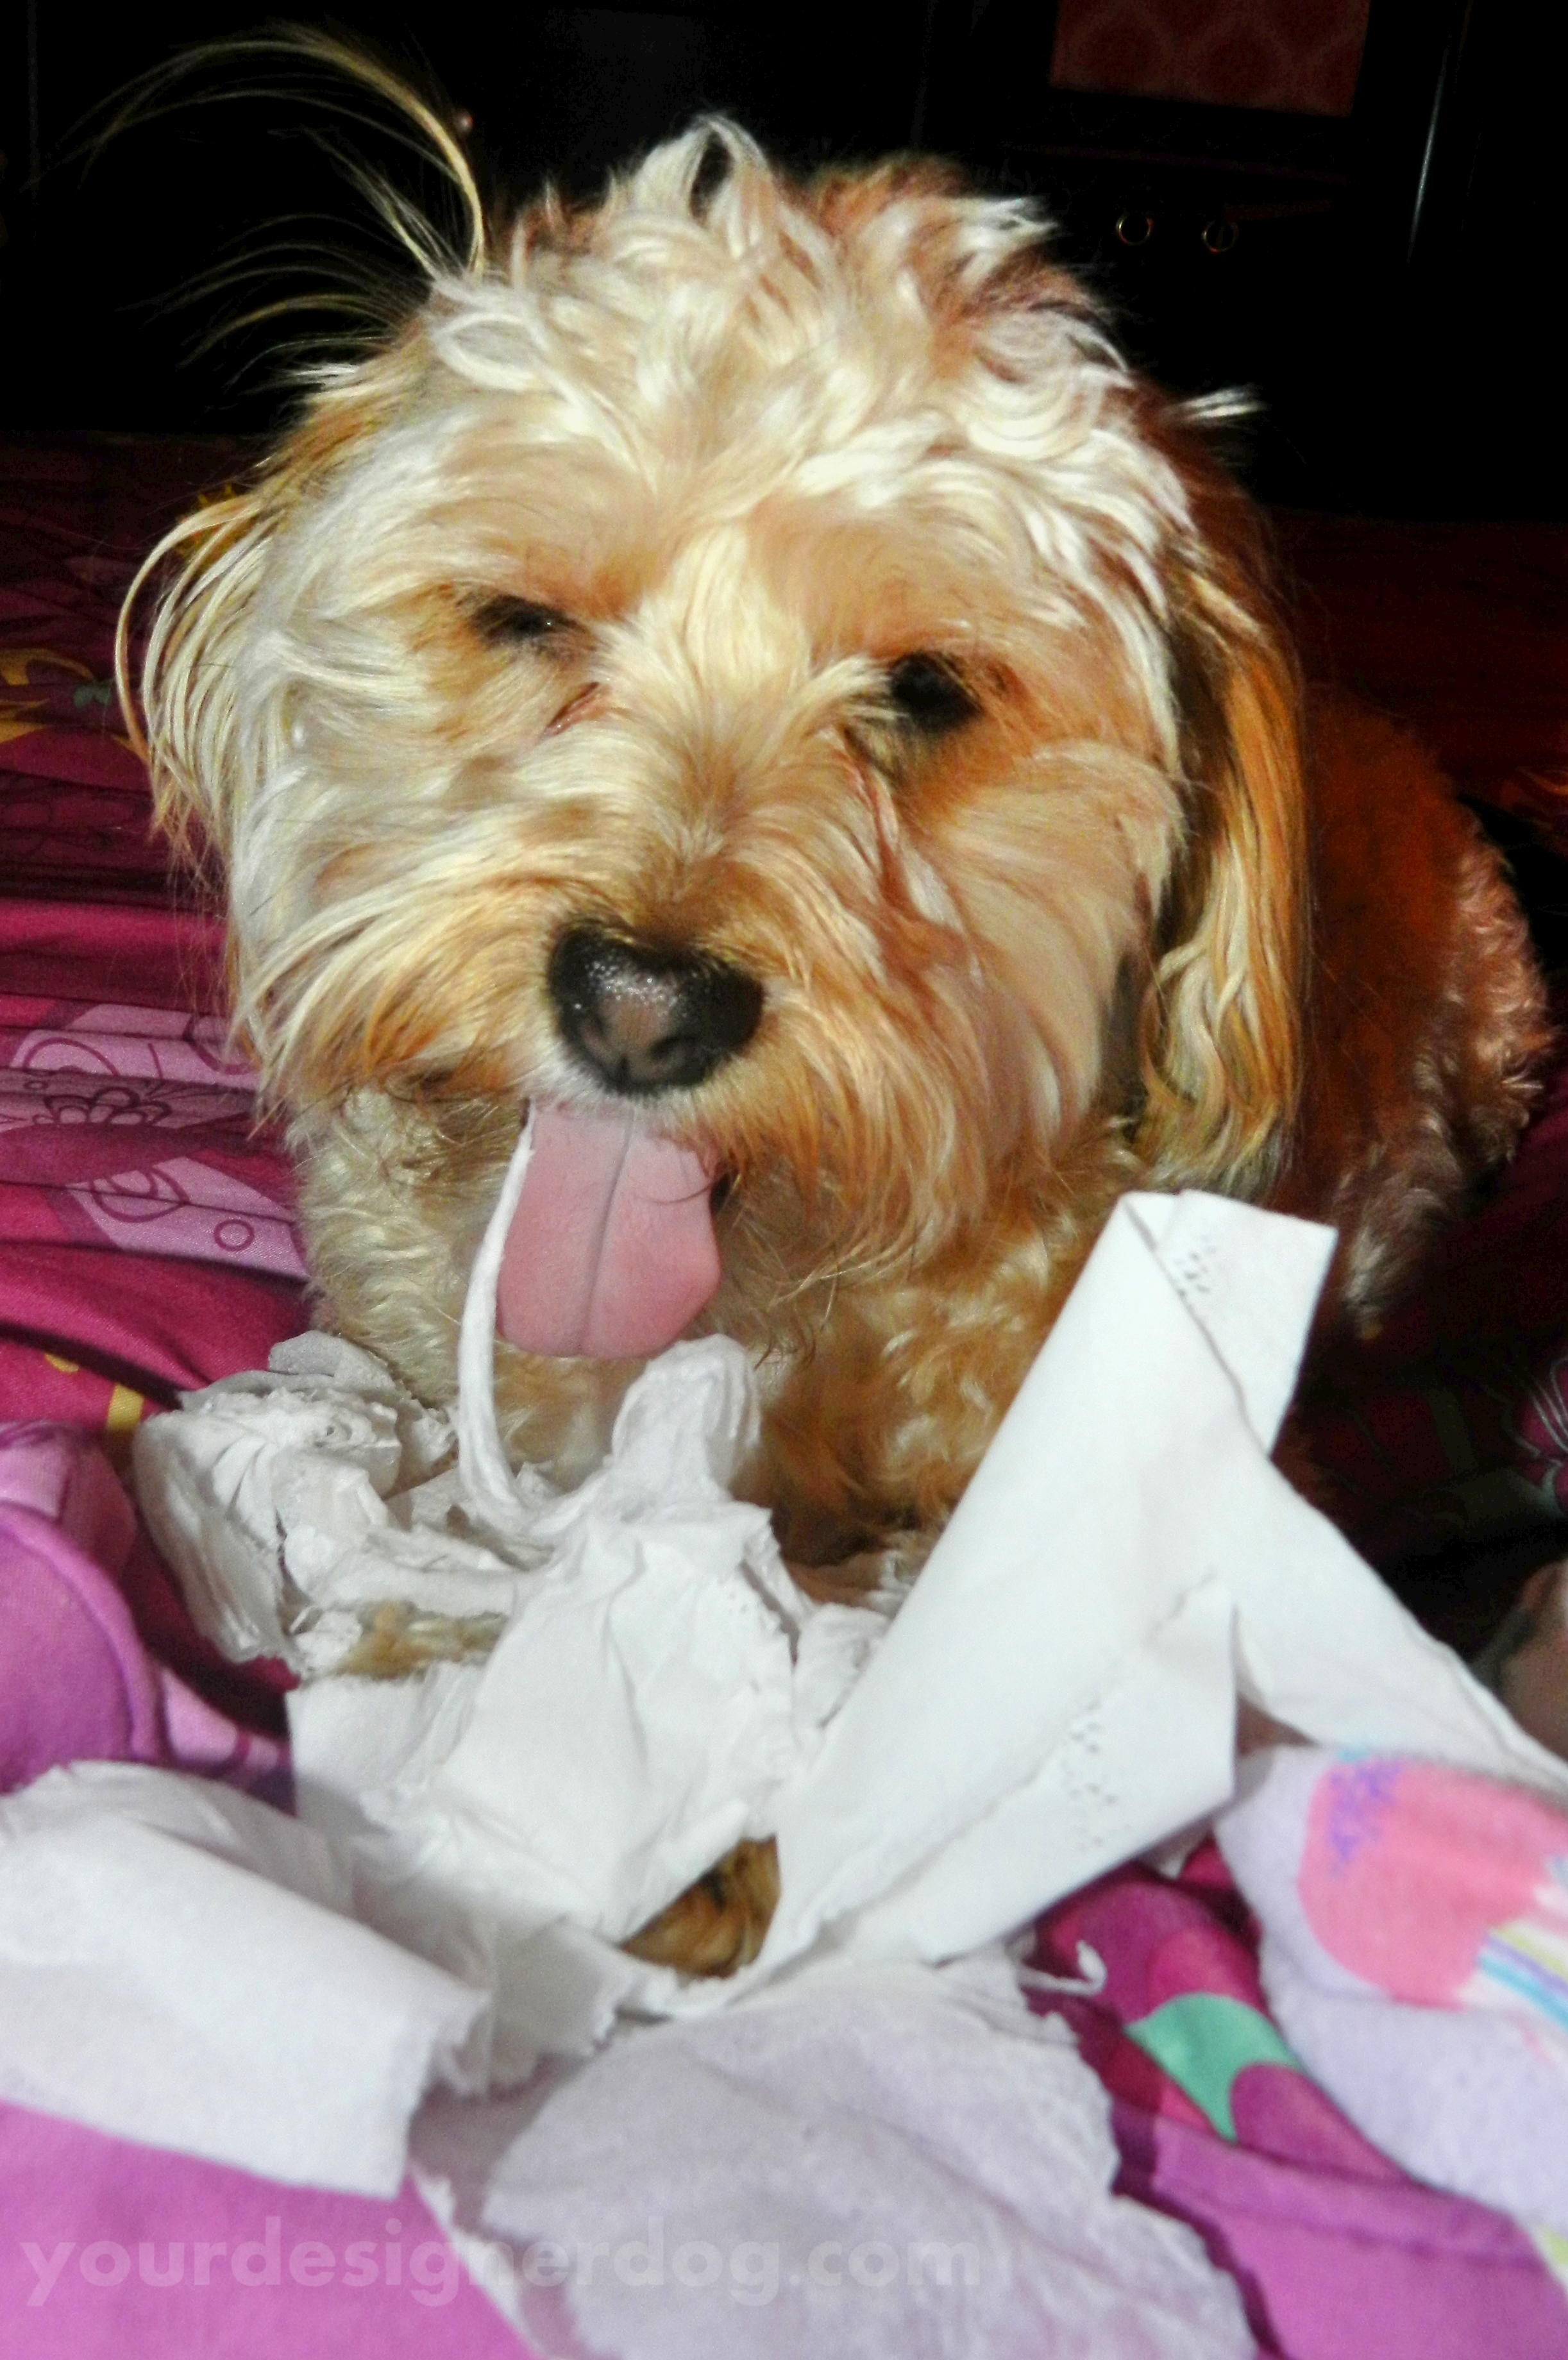 dogs, designer dogs, yorkipoo, yorkie poo, tissue, tongue out